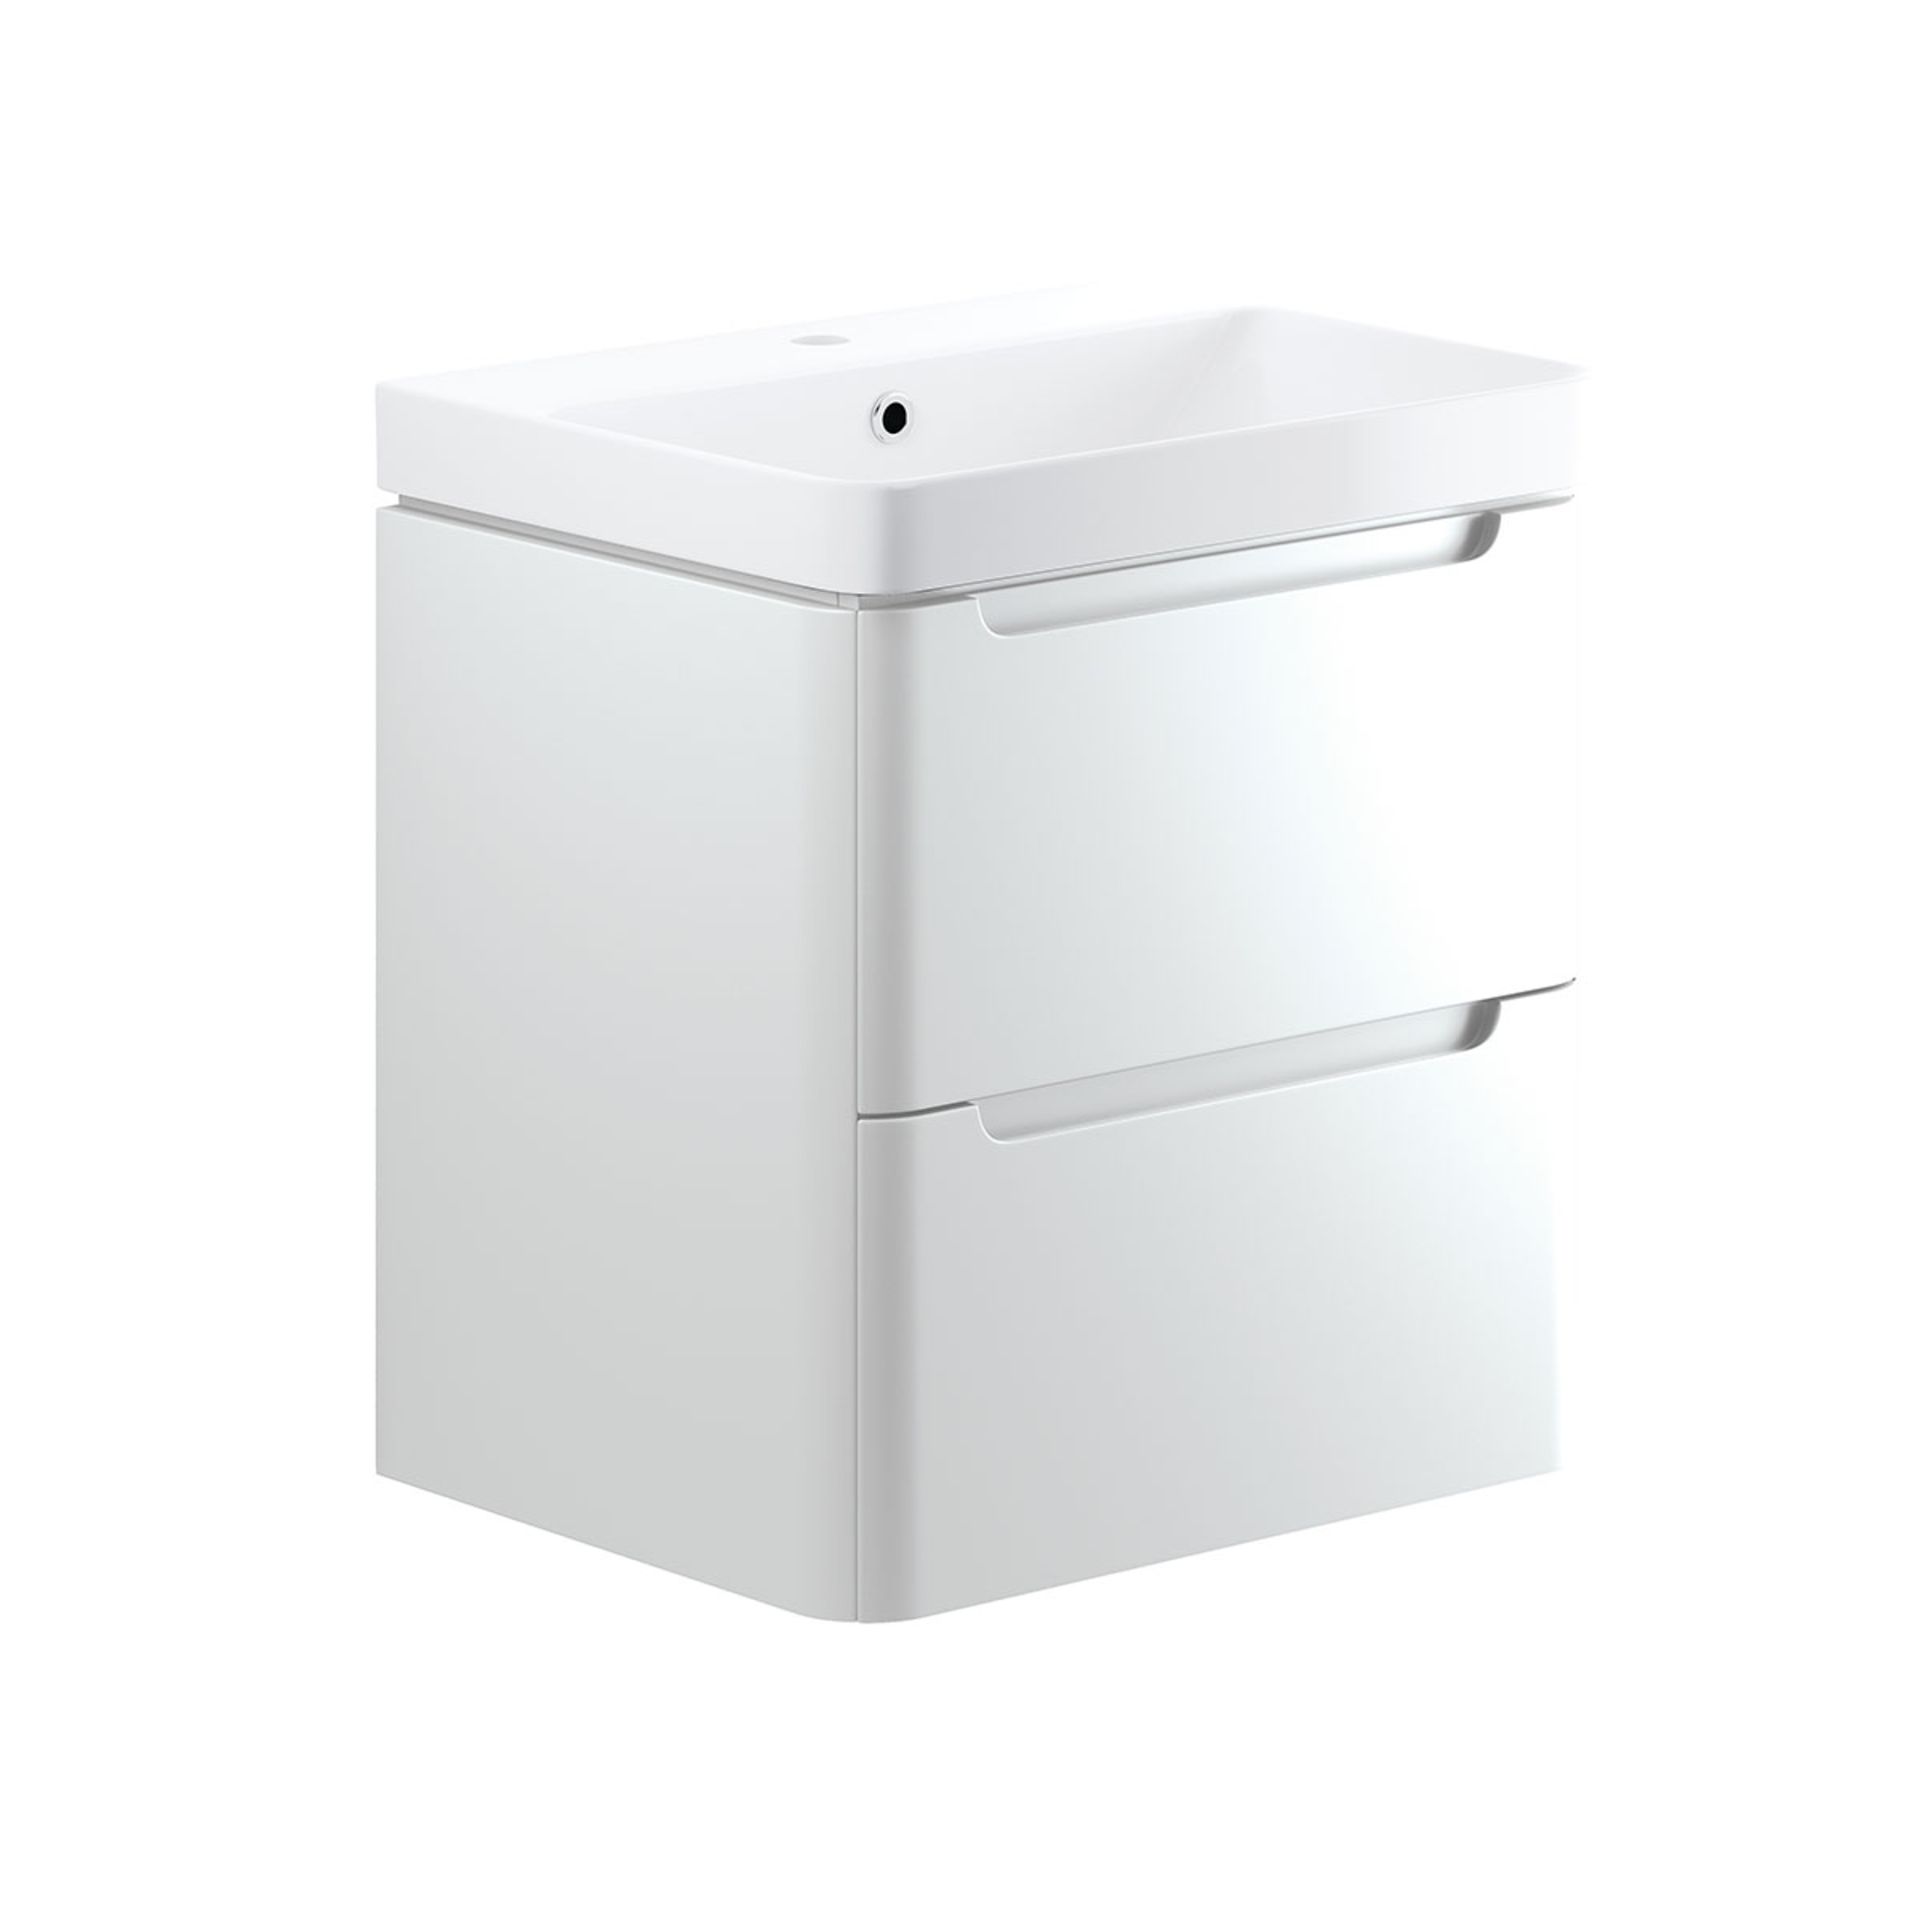 NEW (G149) Lambra 600mm 2 Drawer Wall Hung Vanity Unit - White. RRP £423.99. Comes complete wi... - Image 2 of 2